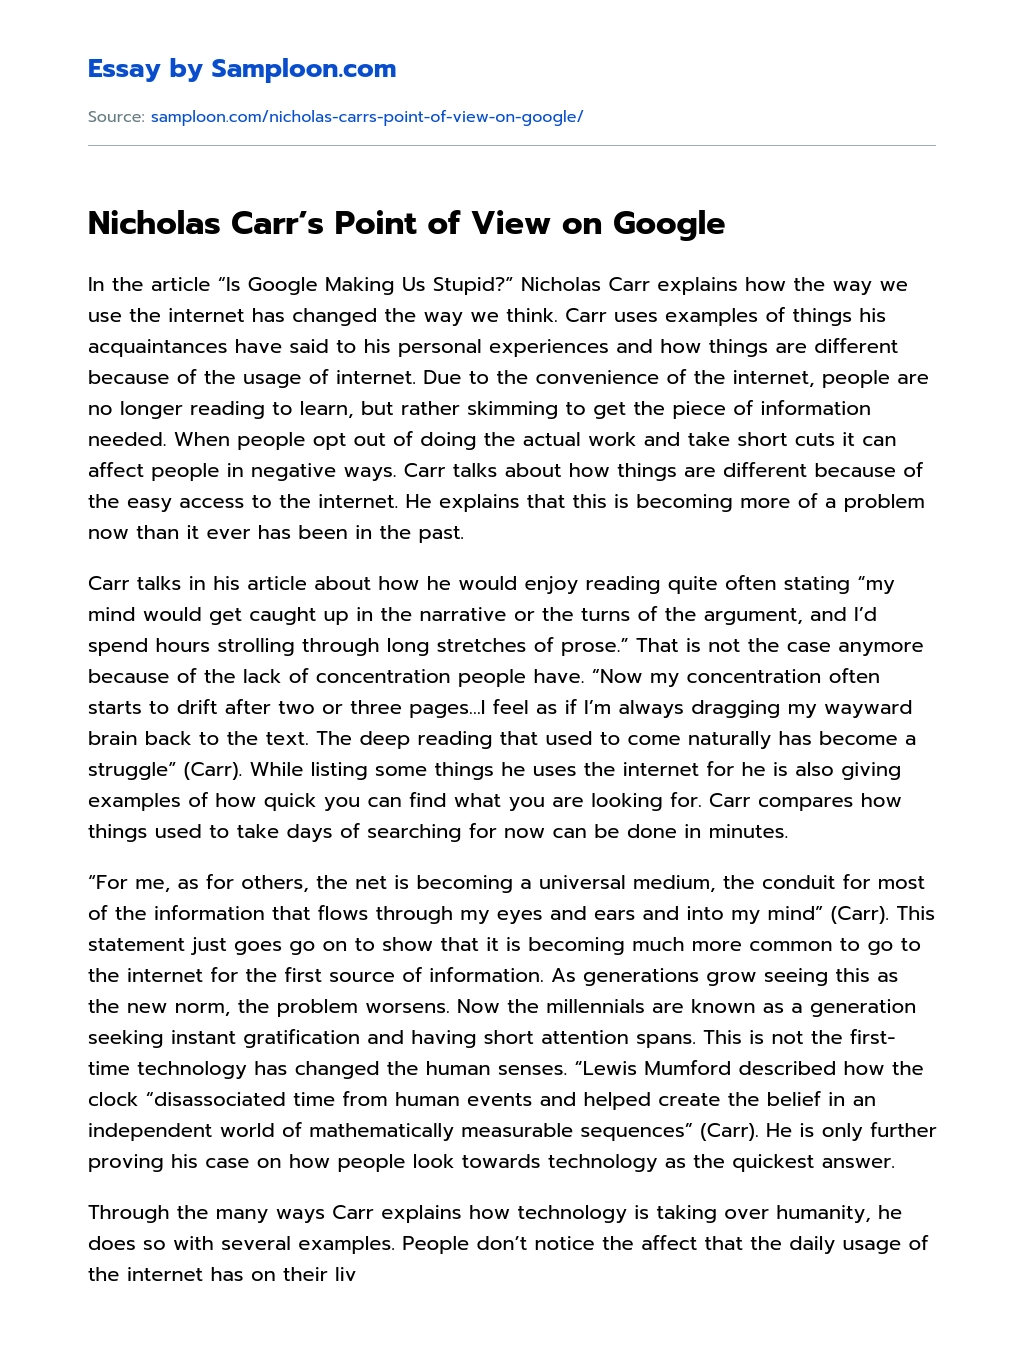 Nicholas Carr’s Point of View on Google essay